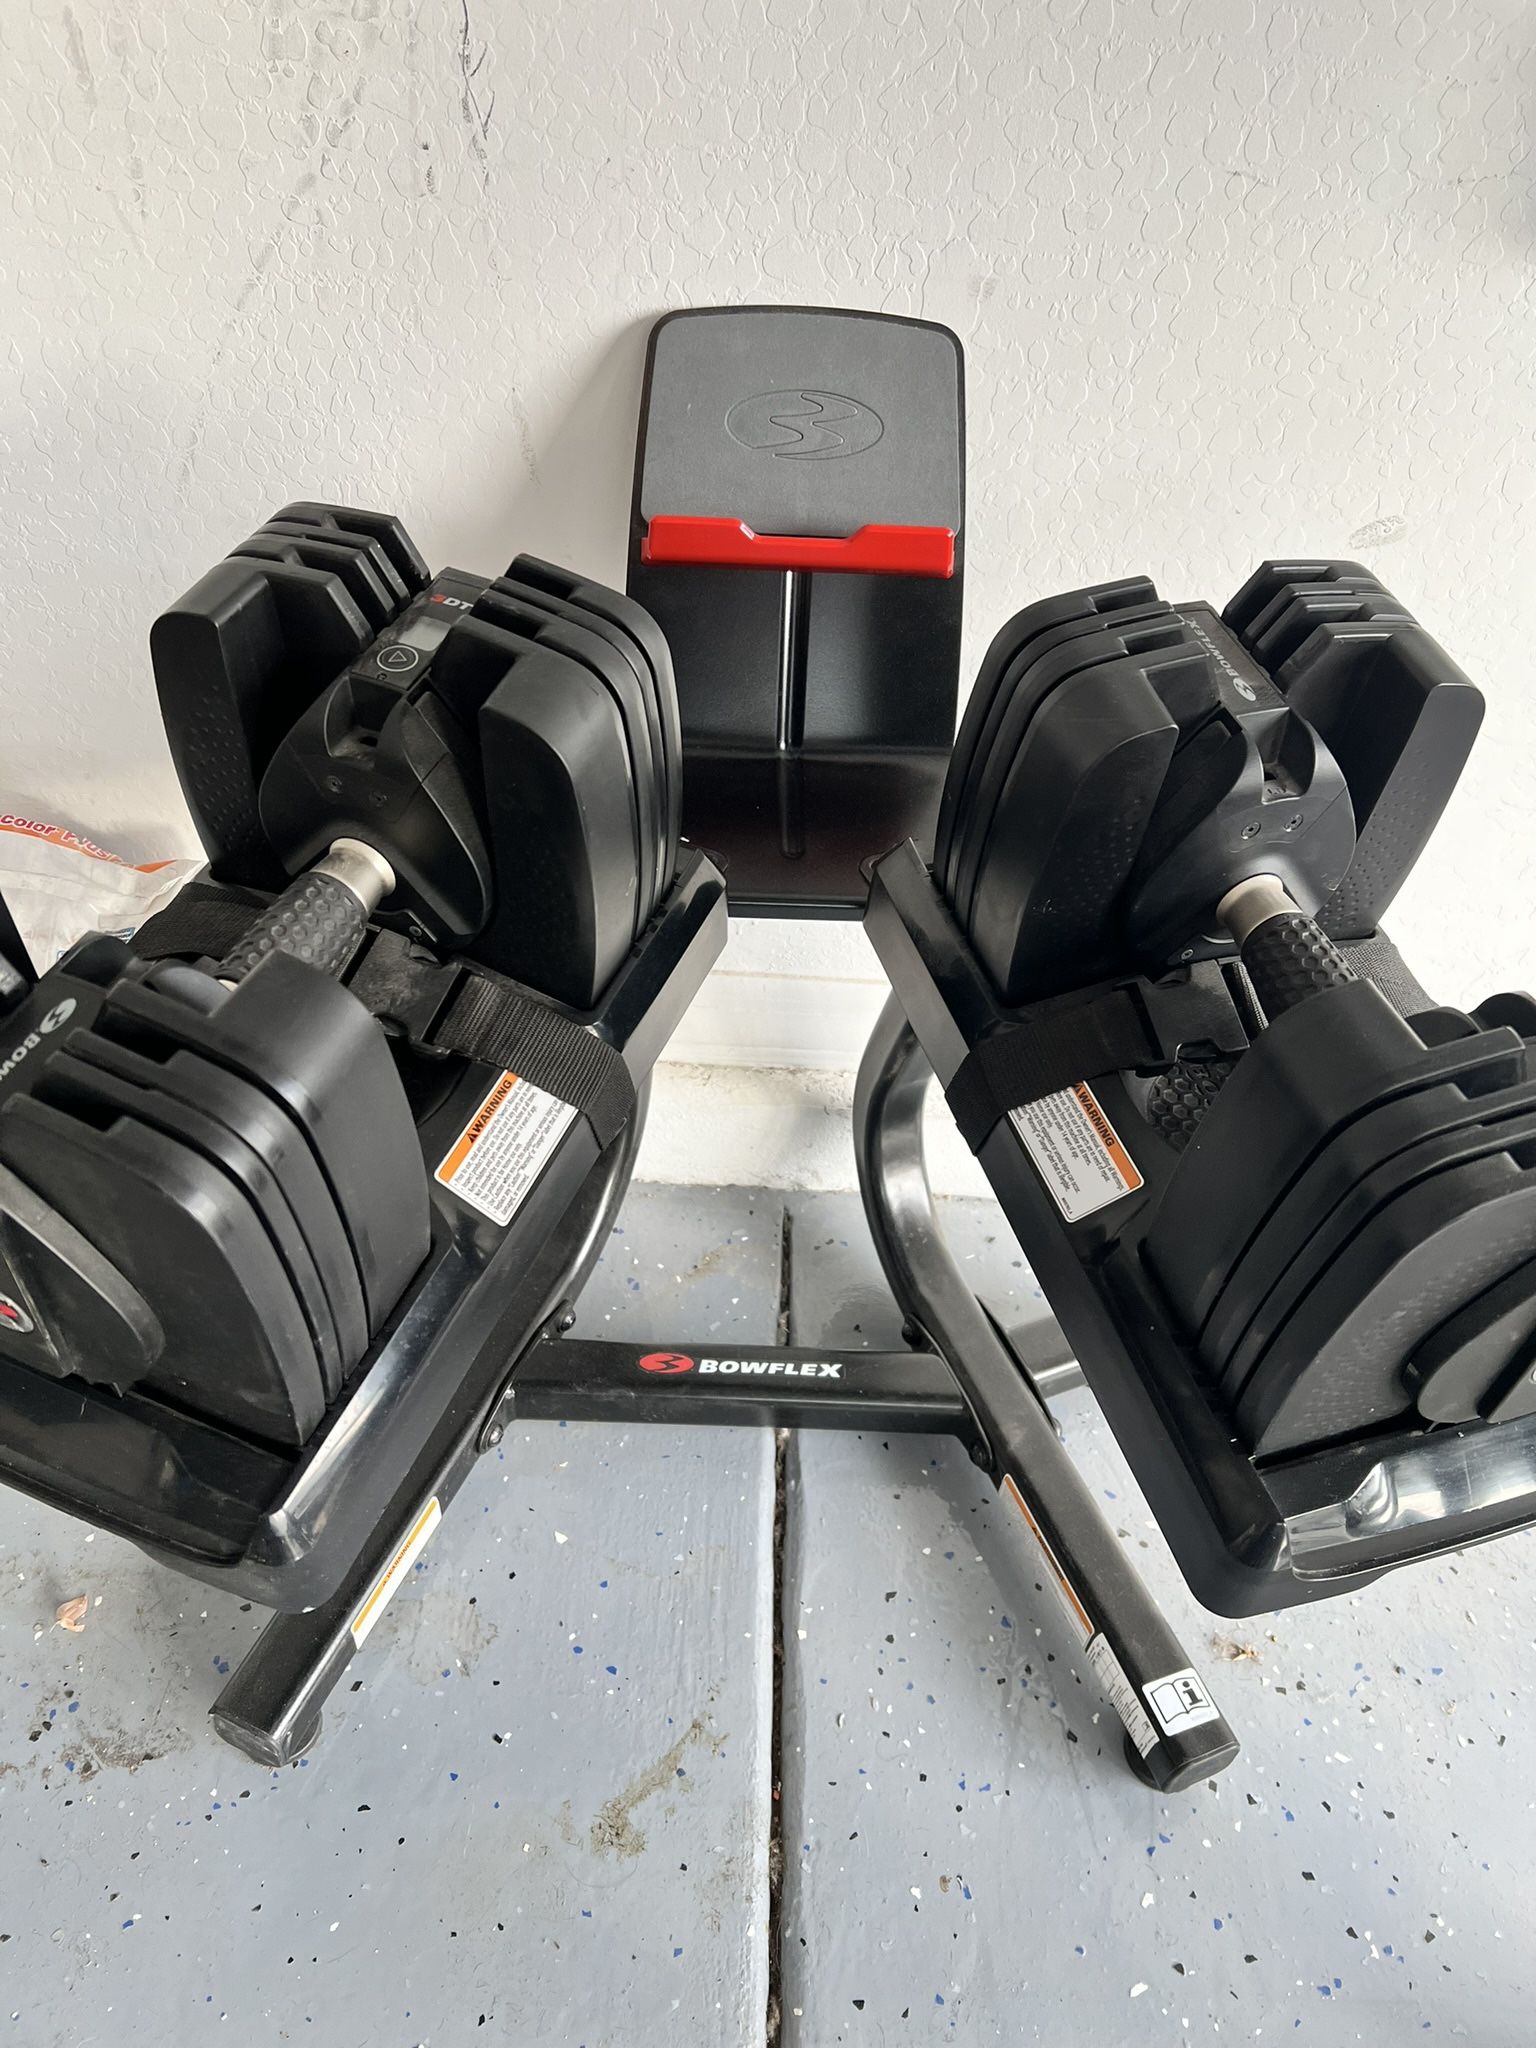 BOWFLEX ADJUSTABLE DUMBBELLS AND STAND